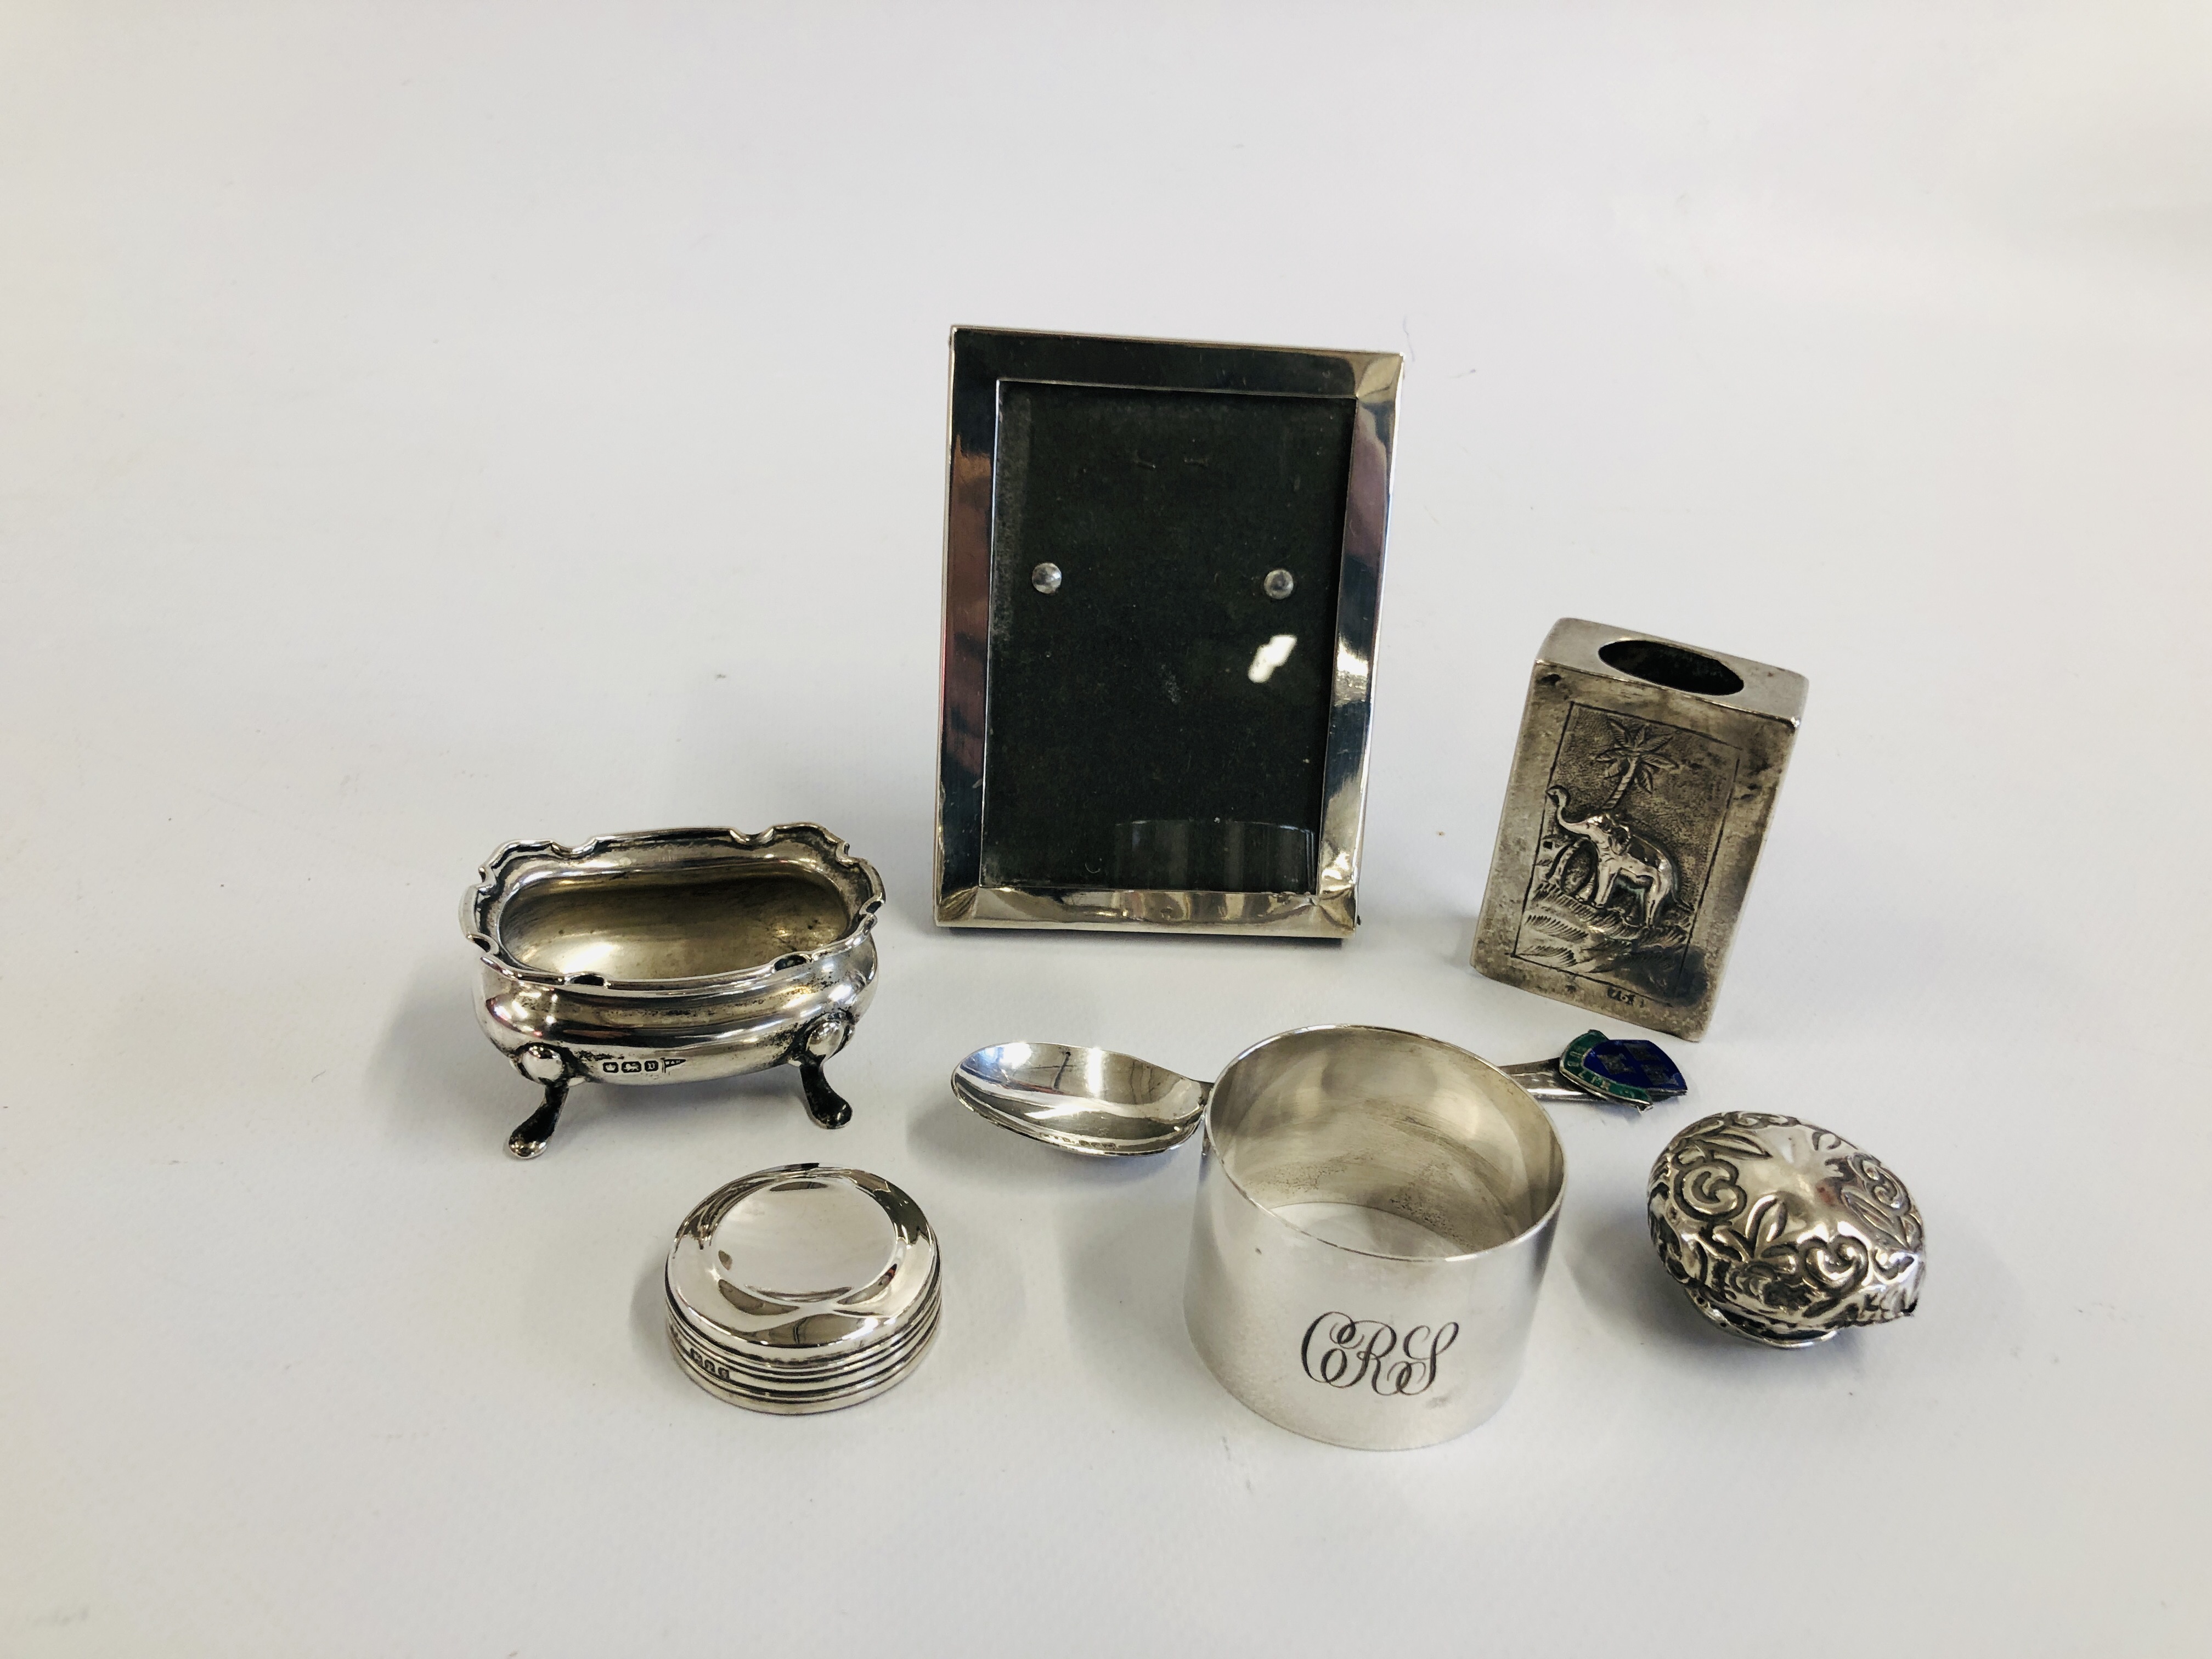 COLLECTION OF SILVER ITEMS INCLUDING A 1947 DUBLIN SILVER SPOON